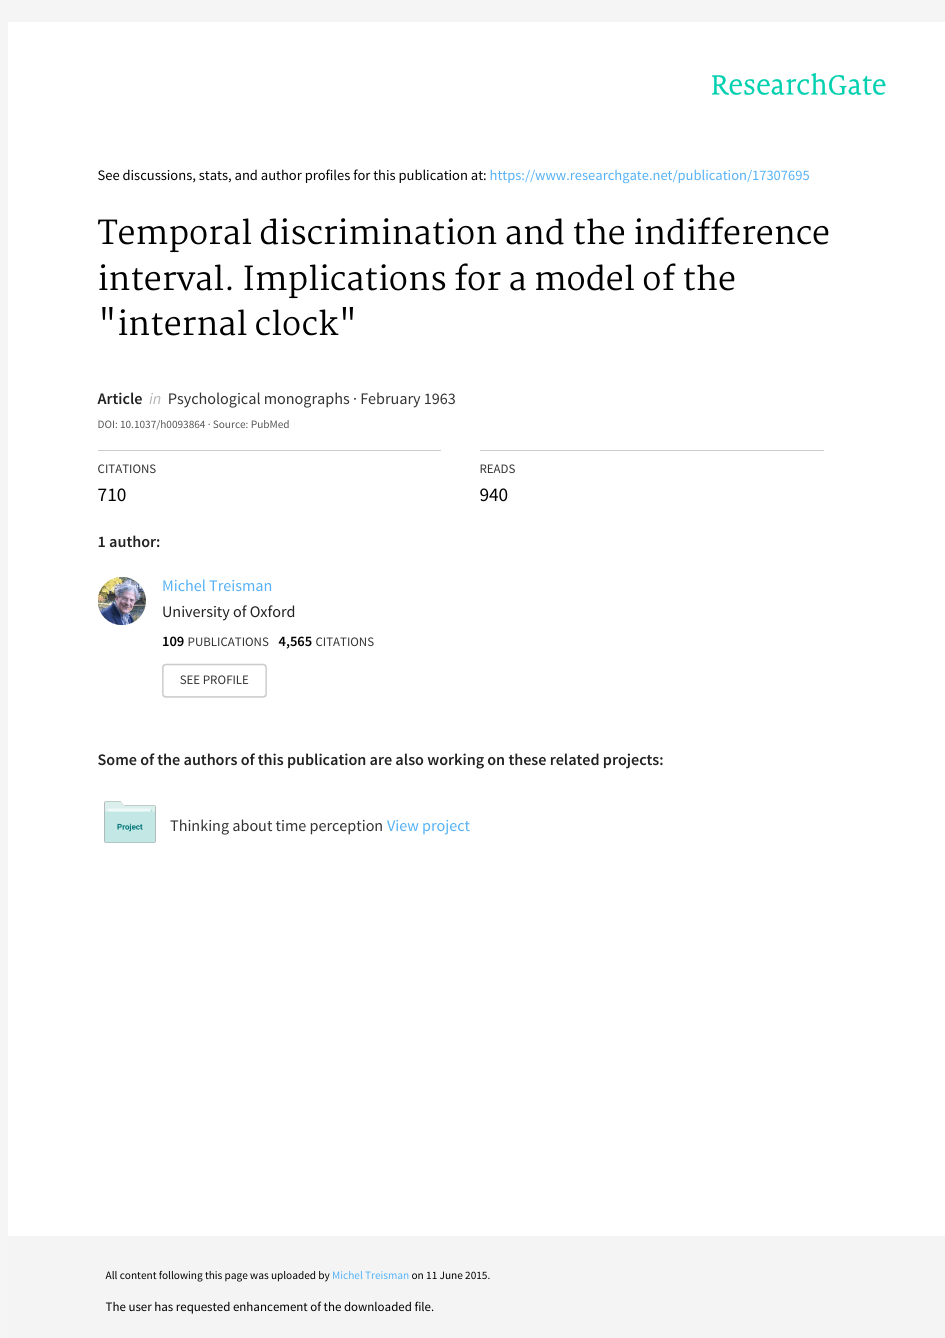 Temporal discrimination and the indifference interval. Implications for a model of the